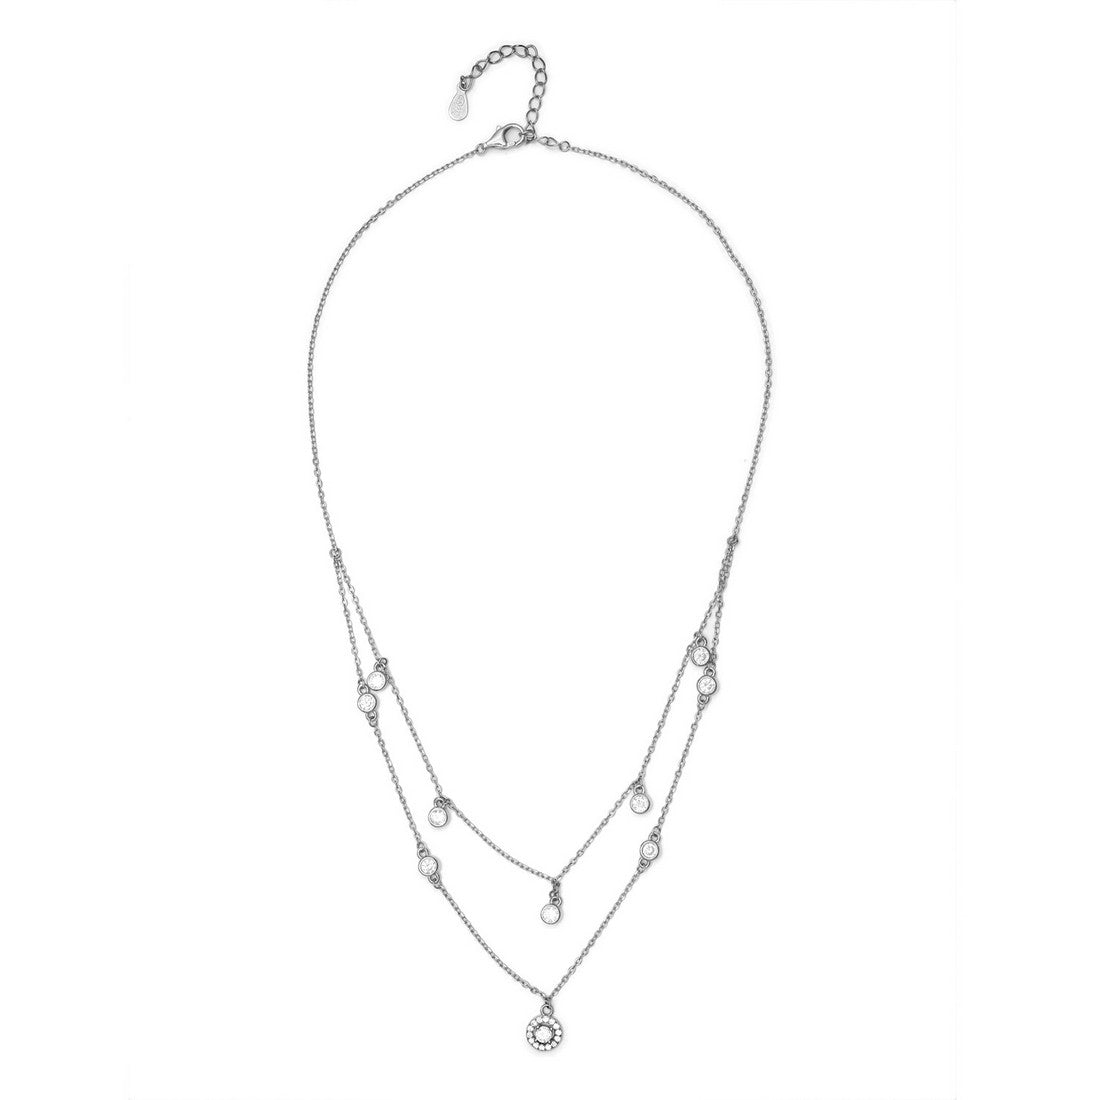 Stunning Silver Layered 925 Silver Necklace